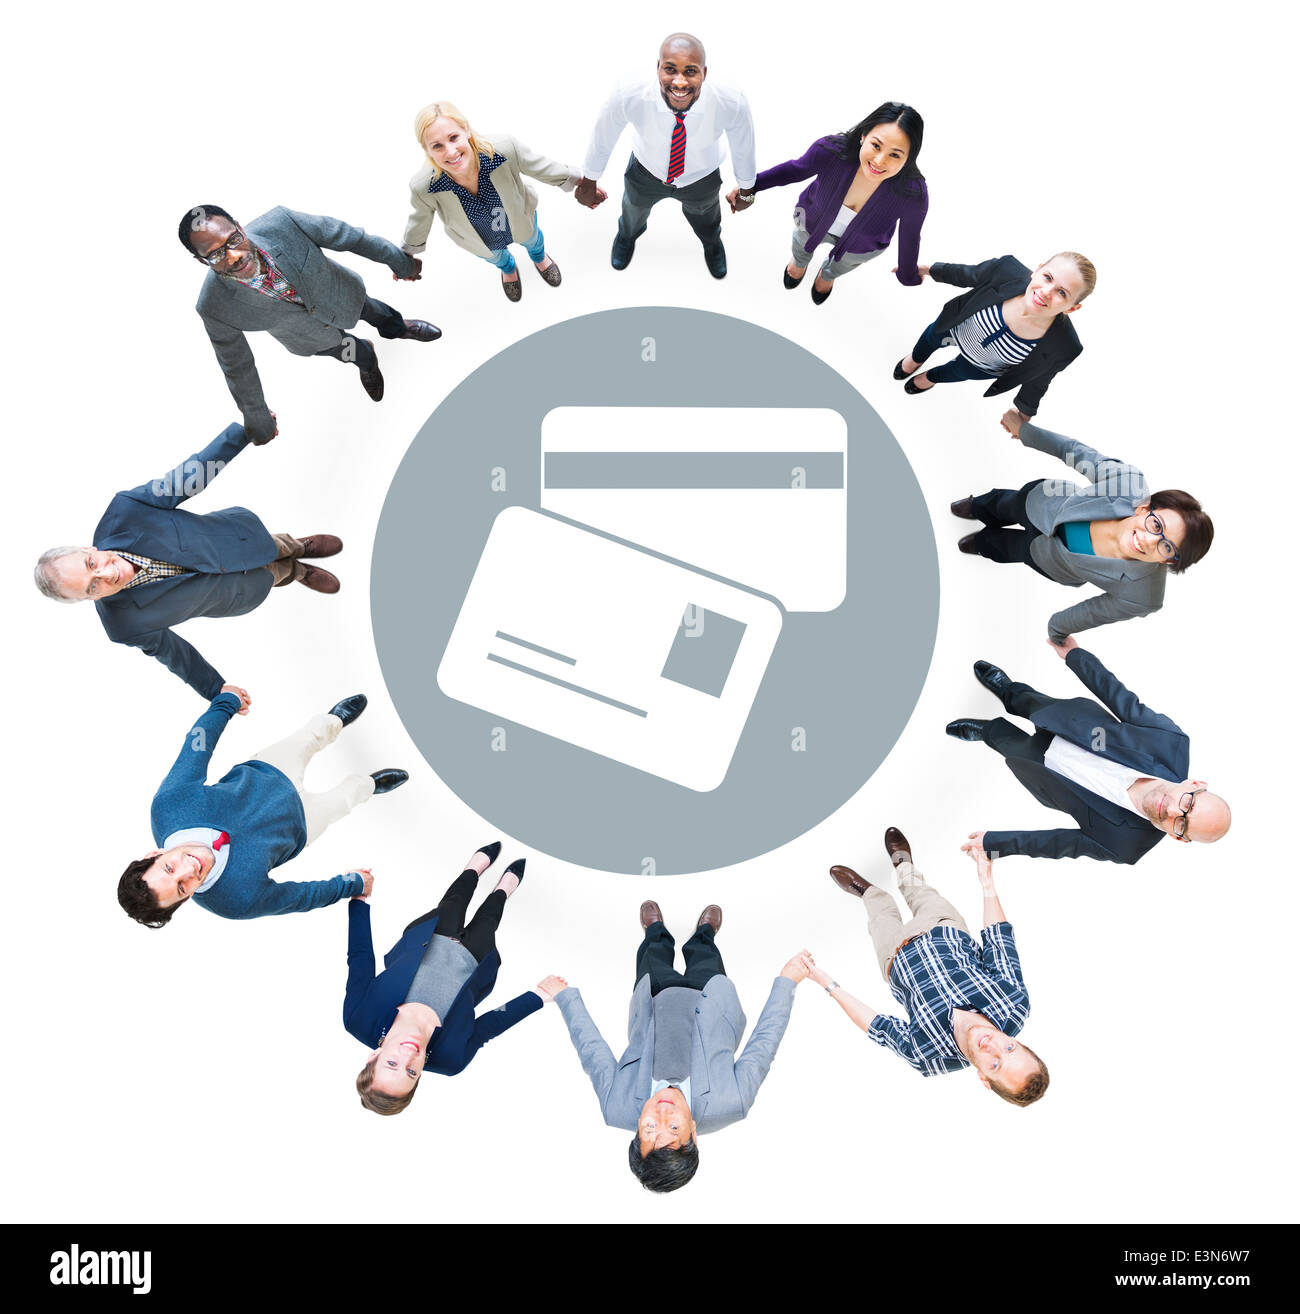 Cheerful Business People Looking Up with Credit Card Symbol Stock Photo